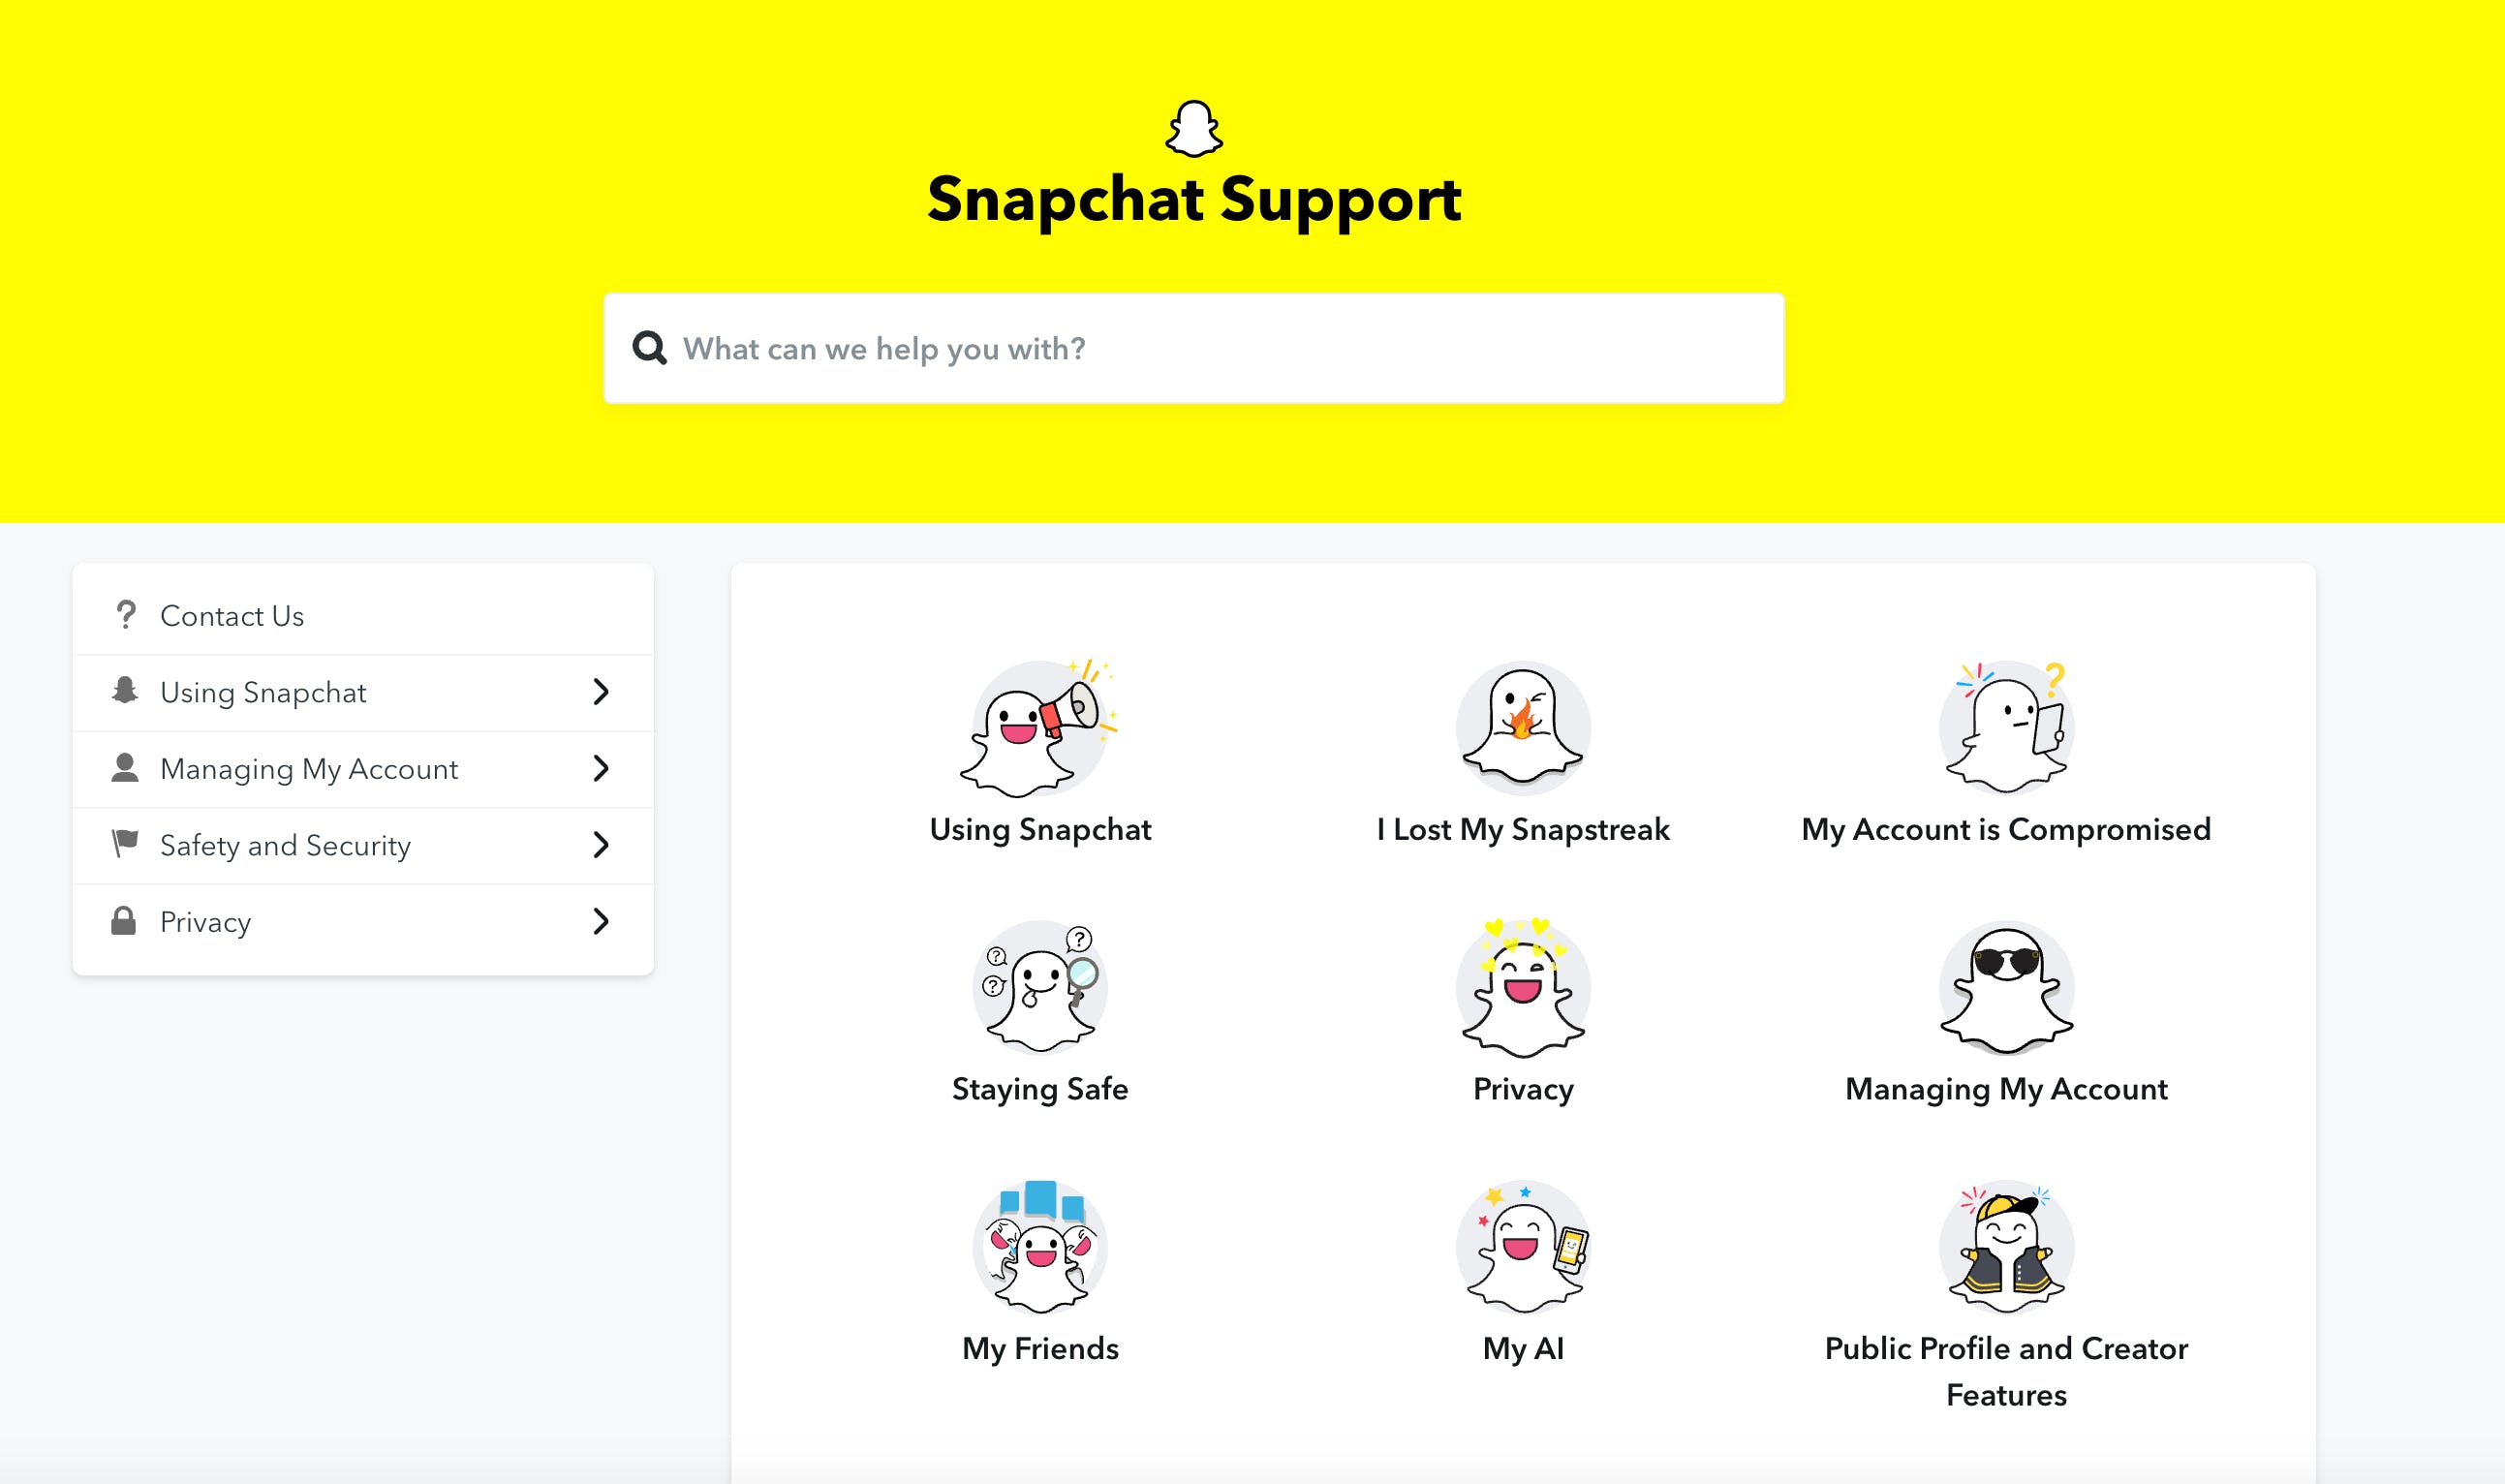 Snapchat support can help with bugs or errors found on the platform